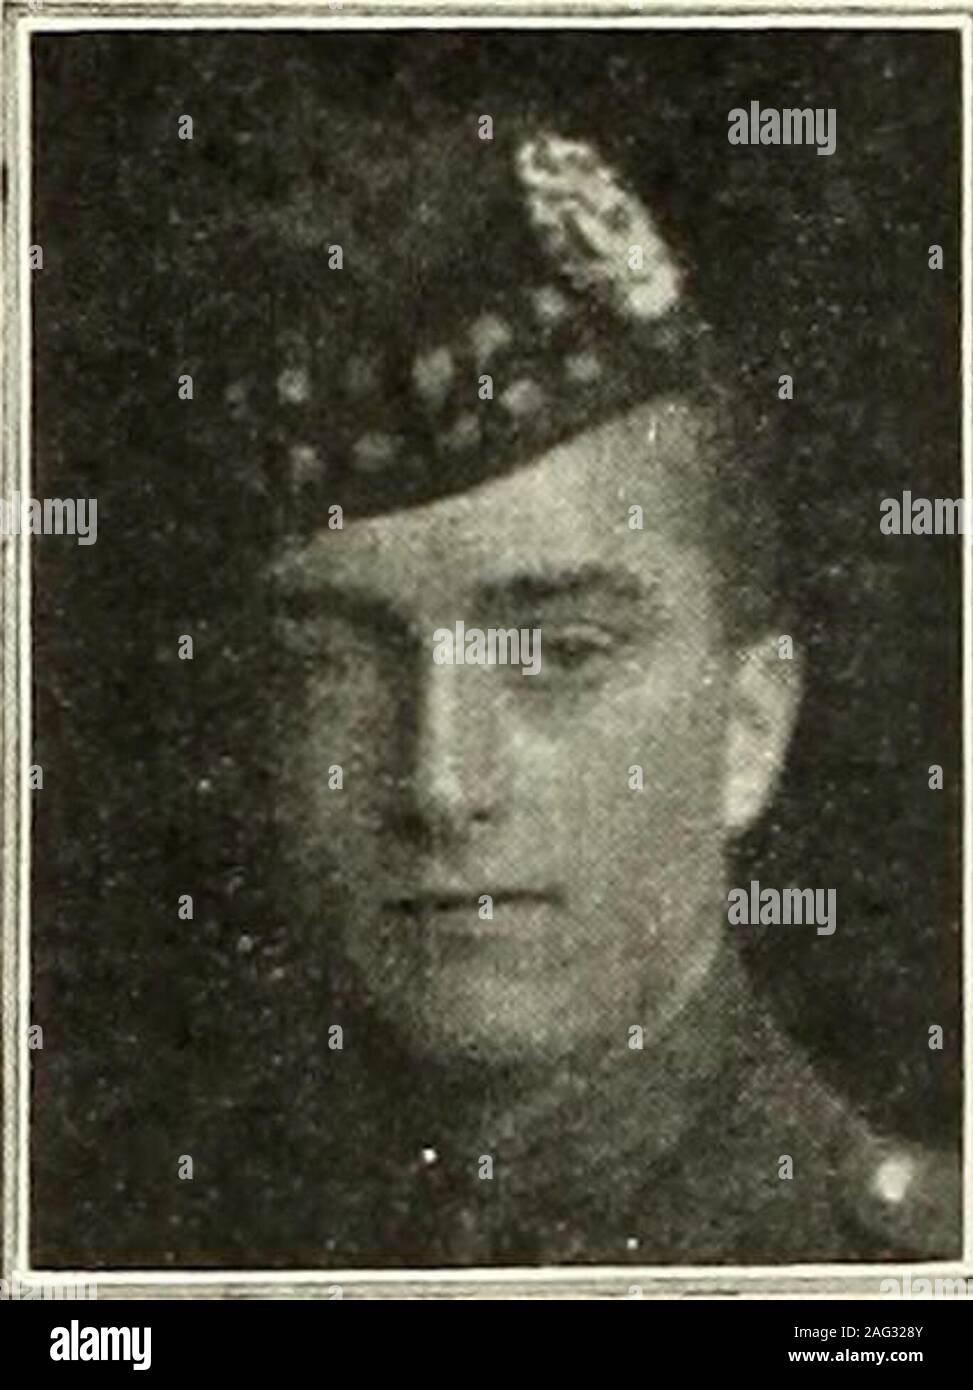 . Roll of service in the Great War, 1914-1919. ROSE, GEORGE DOUGLAS : 2nd Lieu-tenant, 4th Battalion Gordon Highland-ers; son of Dr. GeorgeRose, Aberdeen ; bornAberdeen, 29 April1895 ; educated atthe Grammar School ;entered the University1911 ; graduated M.A., 1915, with SecondClass Honours inEconomics. He joined his Bat-talion in July 1915,was gazetted the samemonth, and became acting Lieutenant in October 1916. He spentabout two years at Ripon and Norwich, fromJuly 1915 to March 1917, then crossed toFrance in April 1917 and fought at first inminor engagements around Ypres in Flanders.On 20 S Stock Photo